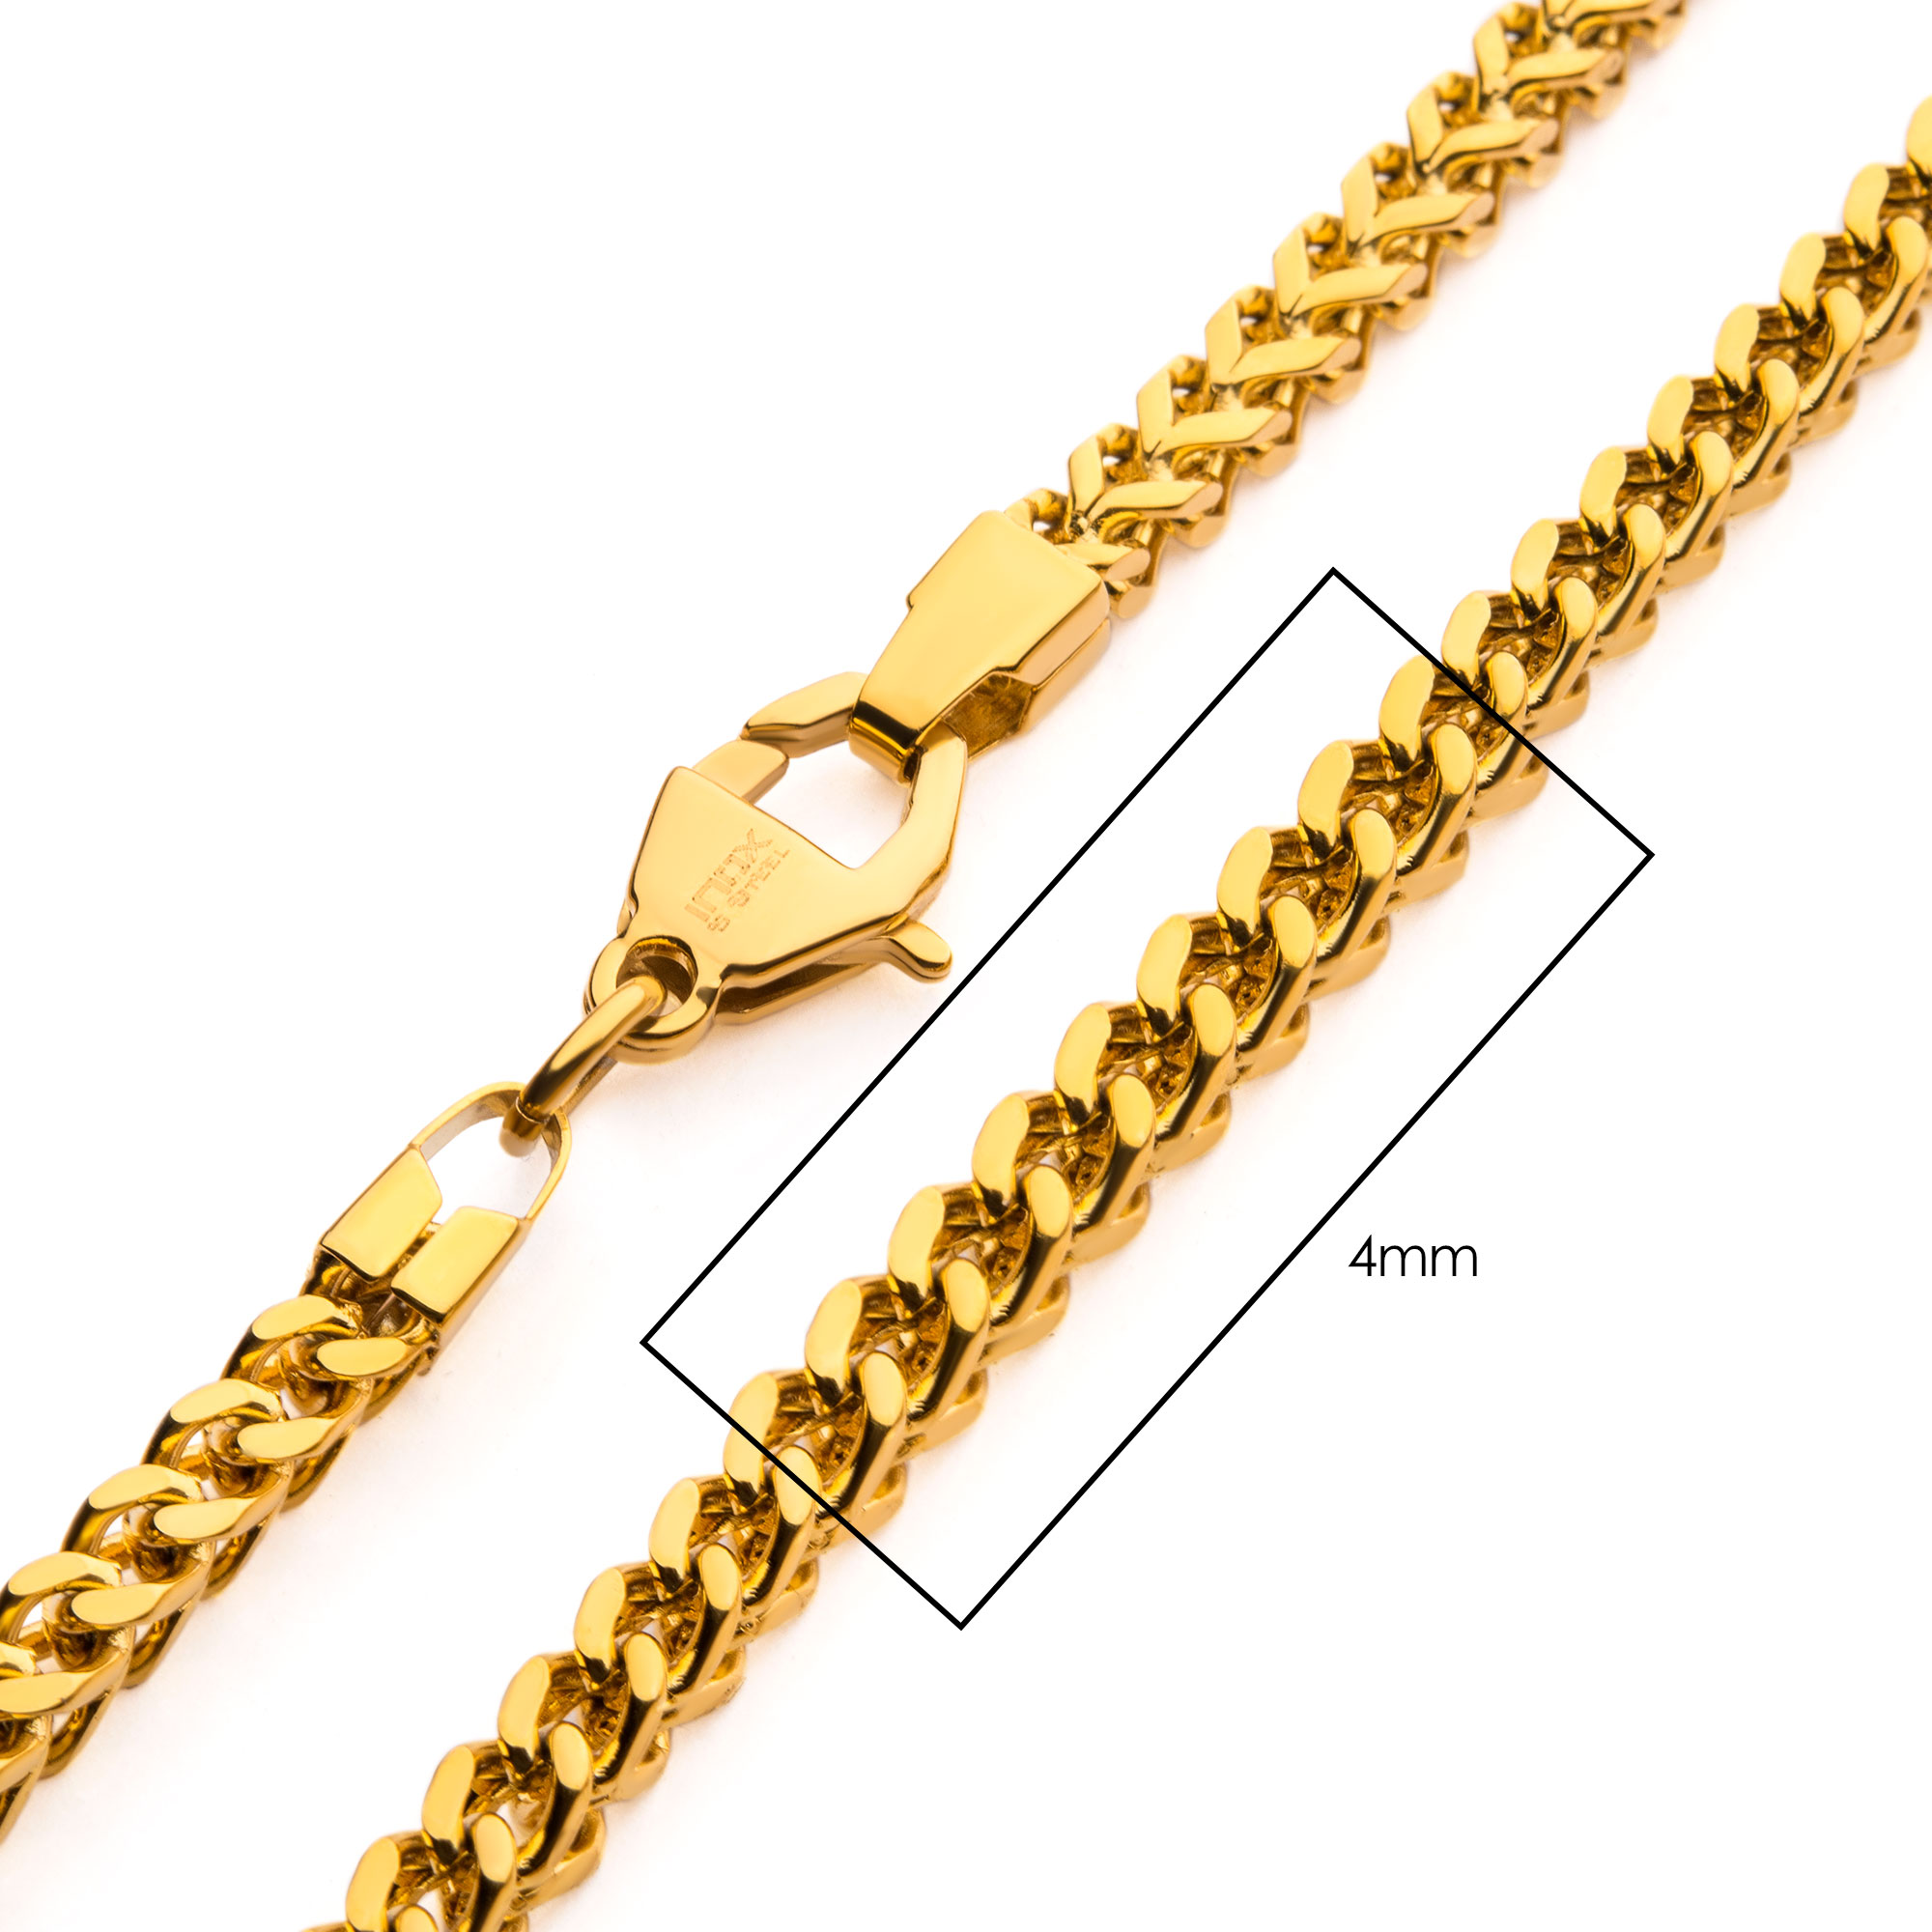 4mm 18K Gold Plated Franco Chain Morin Jewelers Southbridge, MA